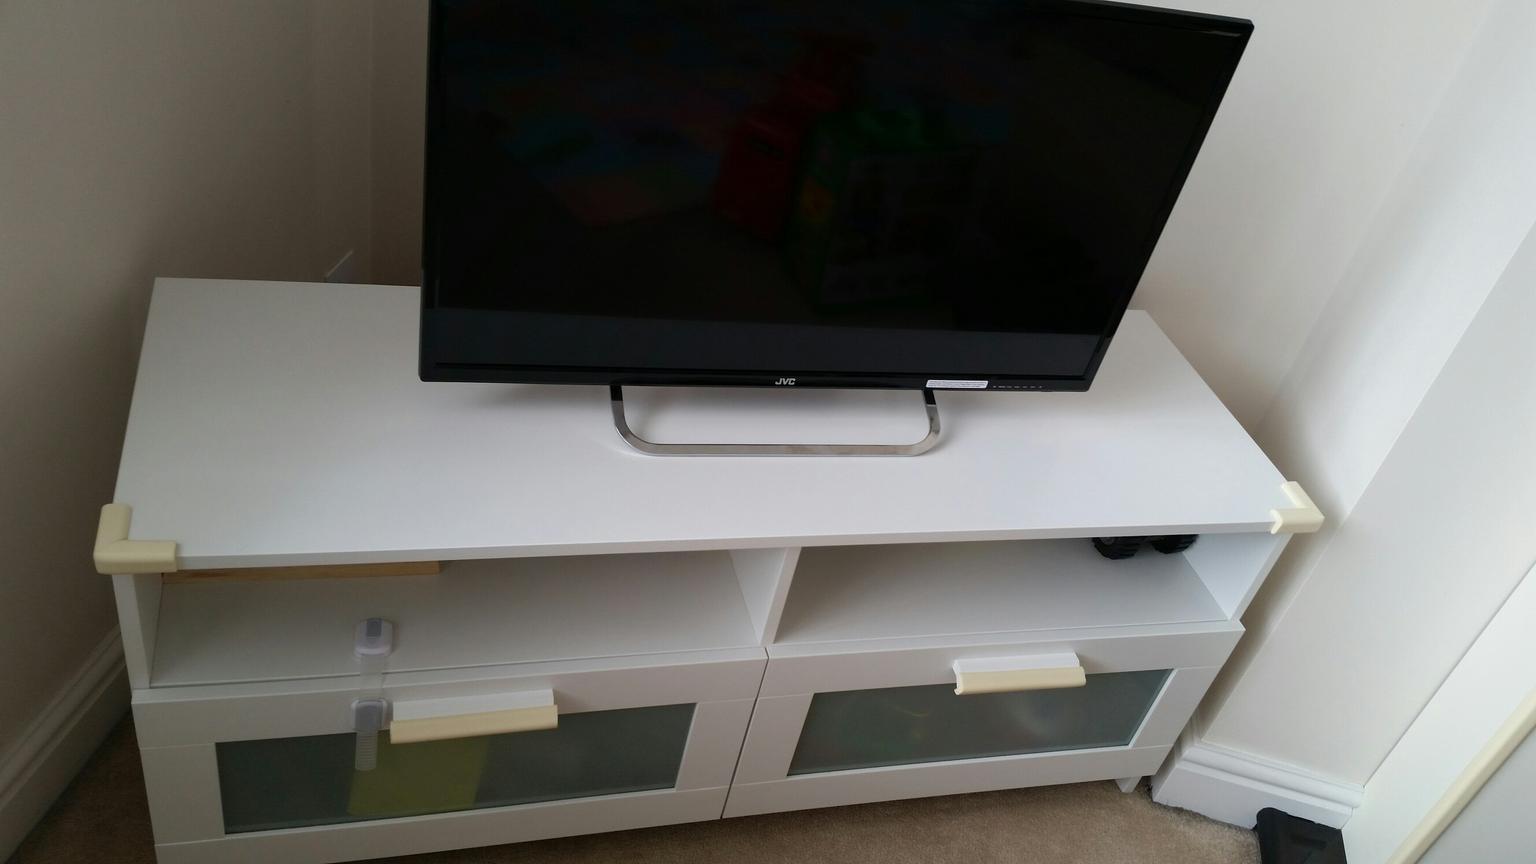 Ikea Brimnes TV stand/unit in Coventry for £35.00 for sale ...